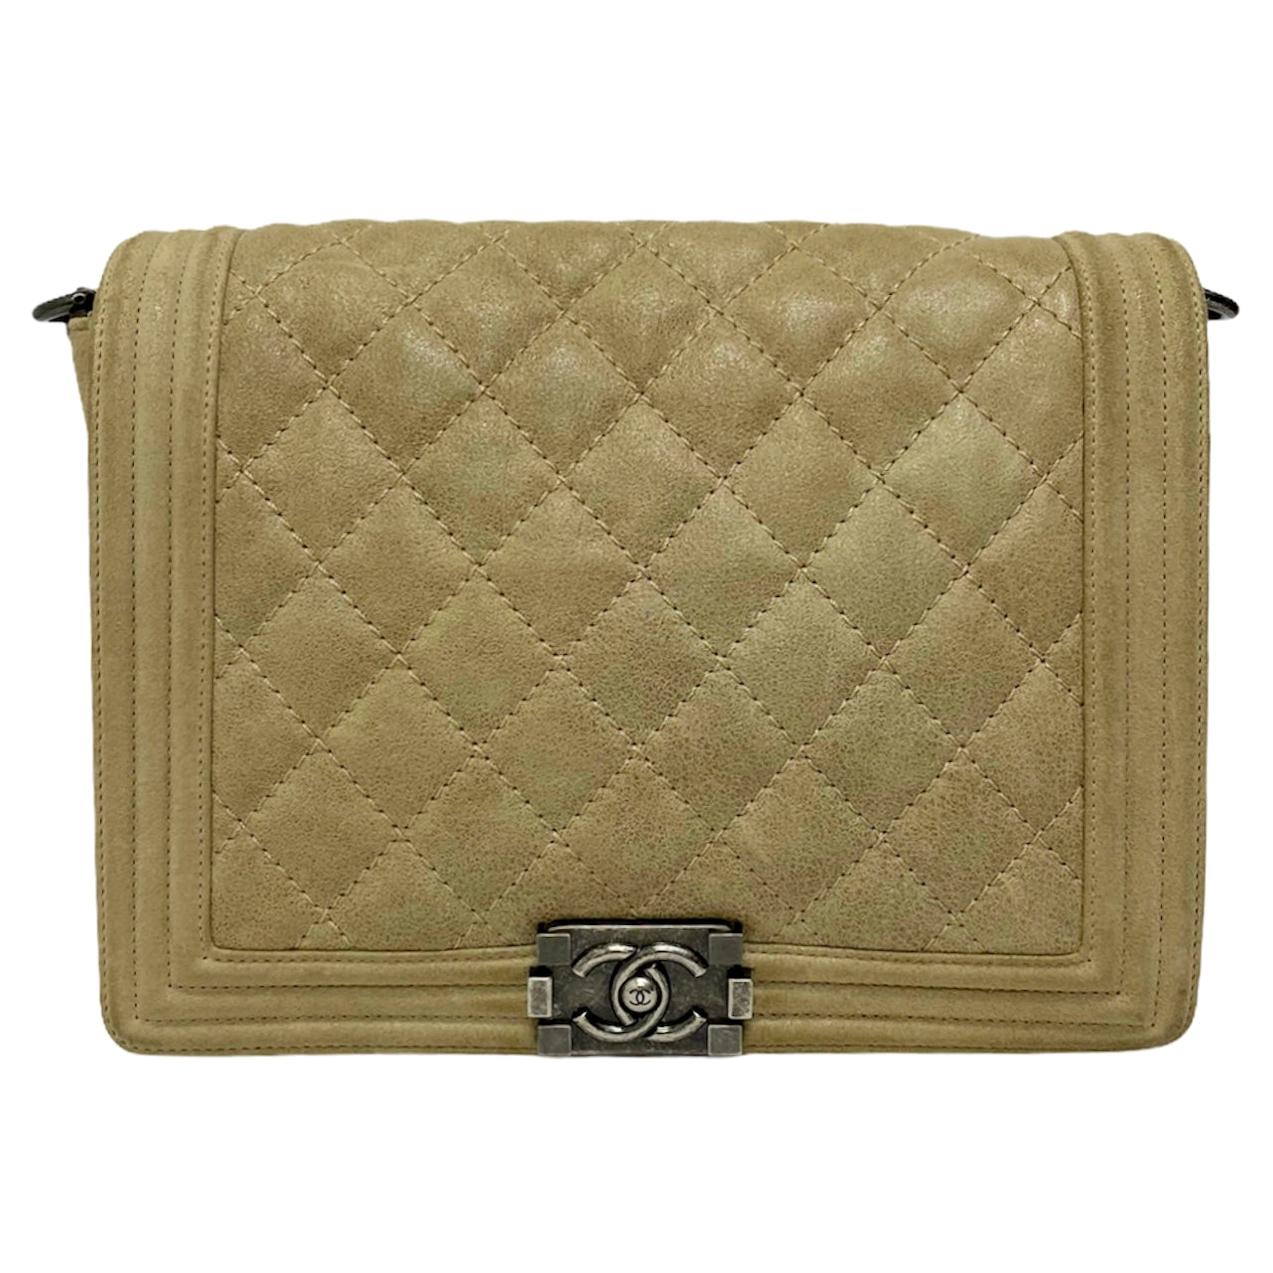 Chanel Boy Beige Bag in Suede with Silver Hardware